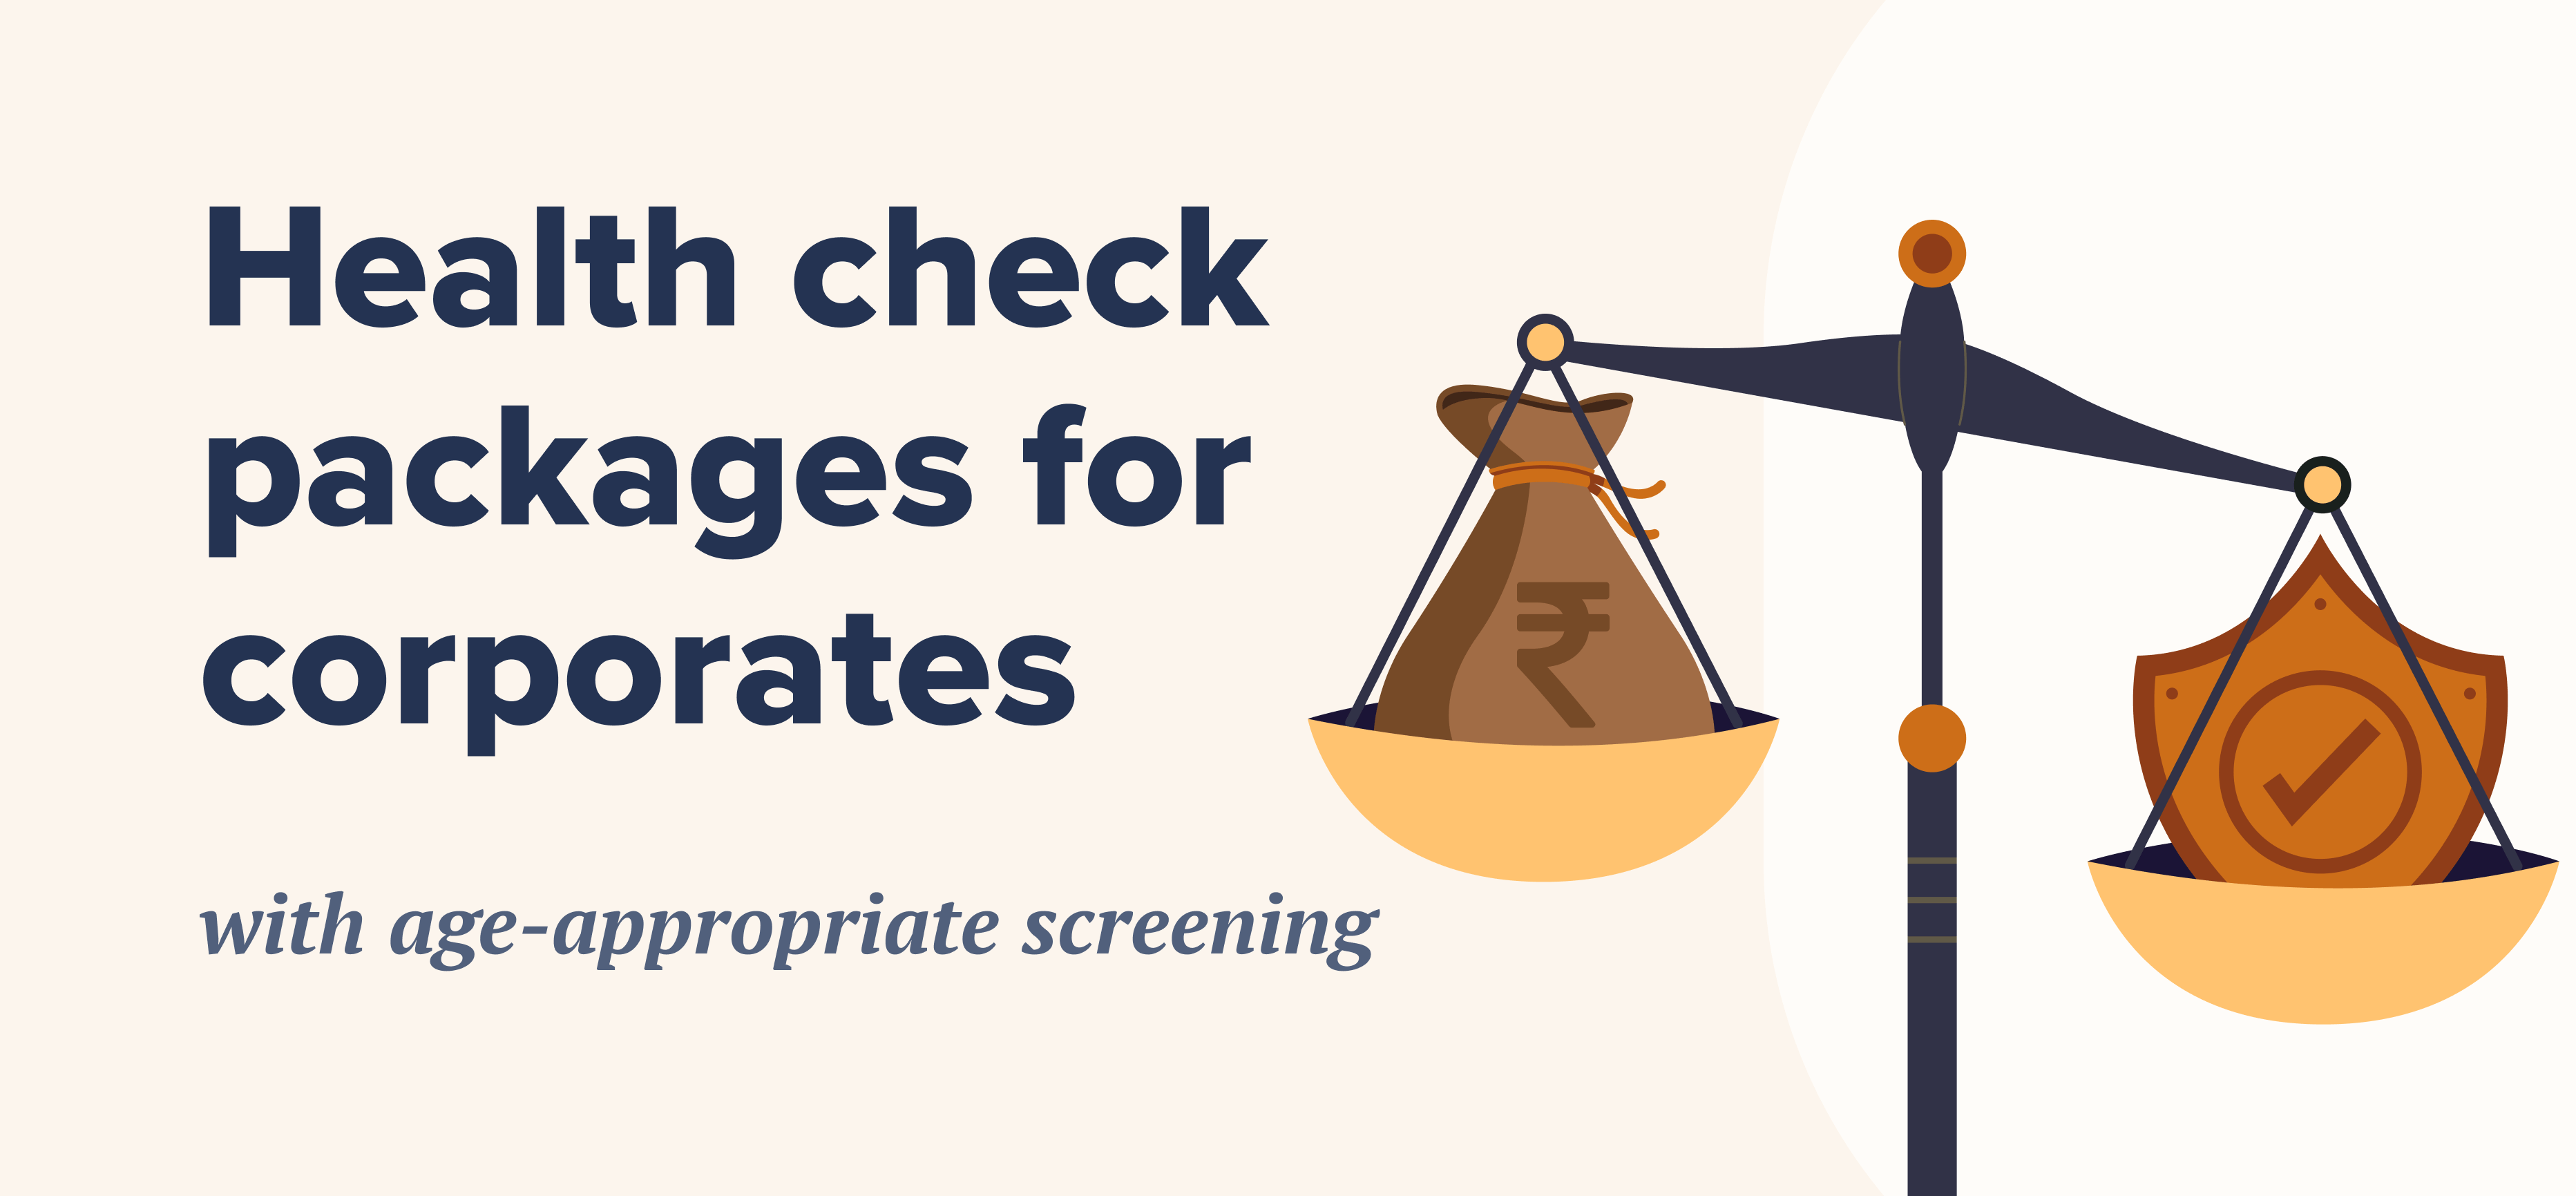 Health check packages for corporates with age-appropriate screening